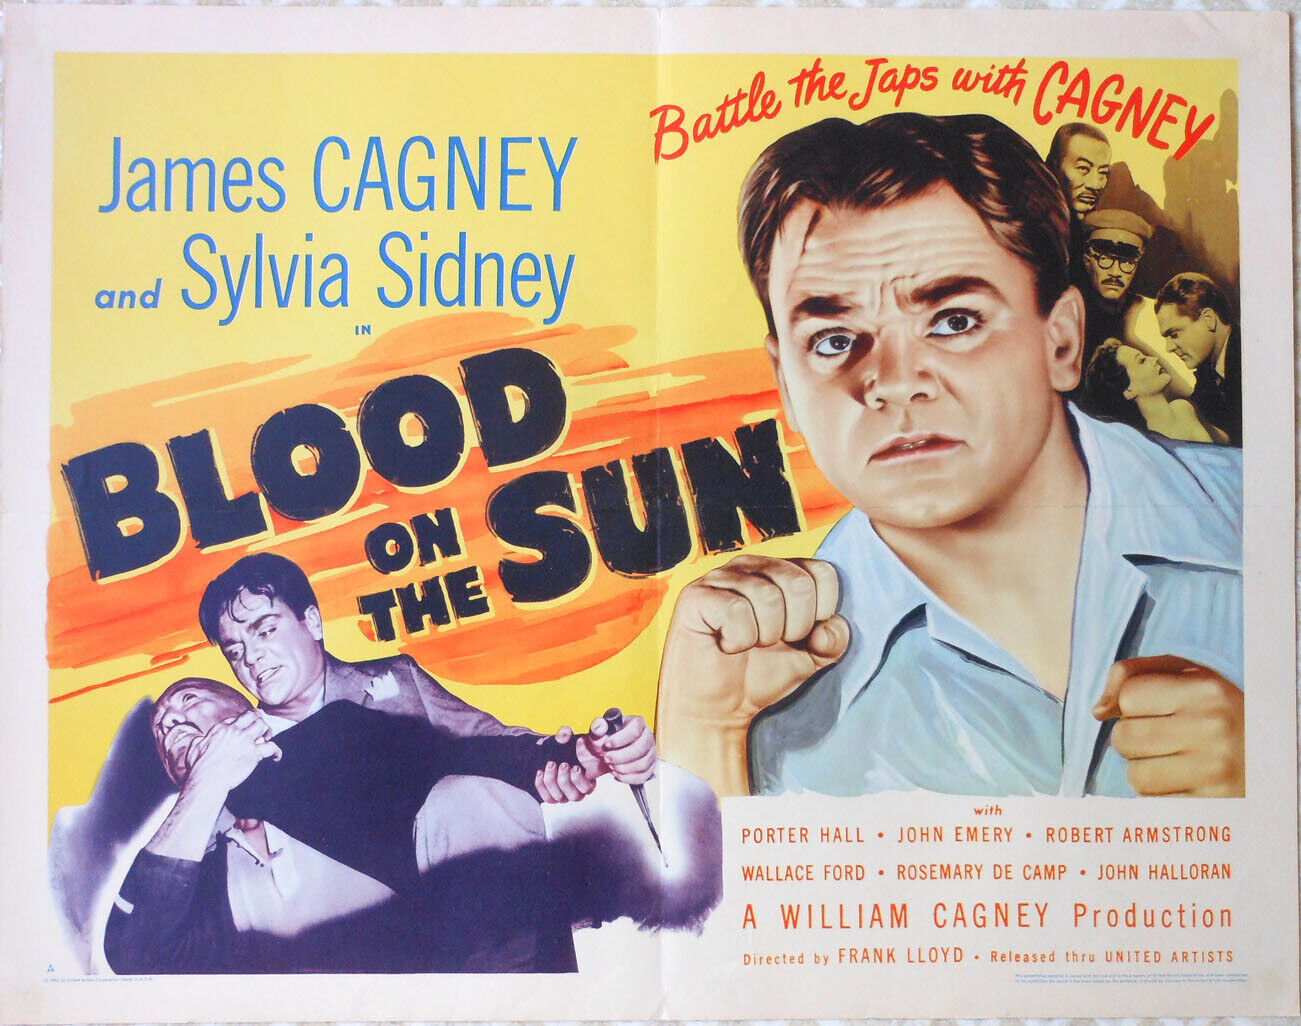 Orig. 22x28 - James Cagney - "blood On The Sun"- 1945 - Sylvia Sidney